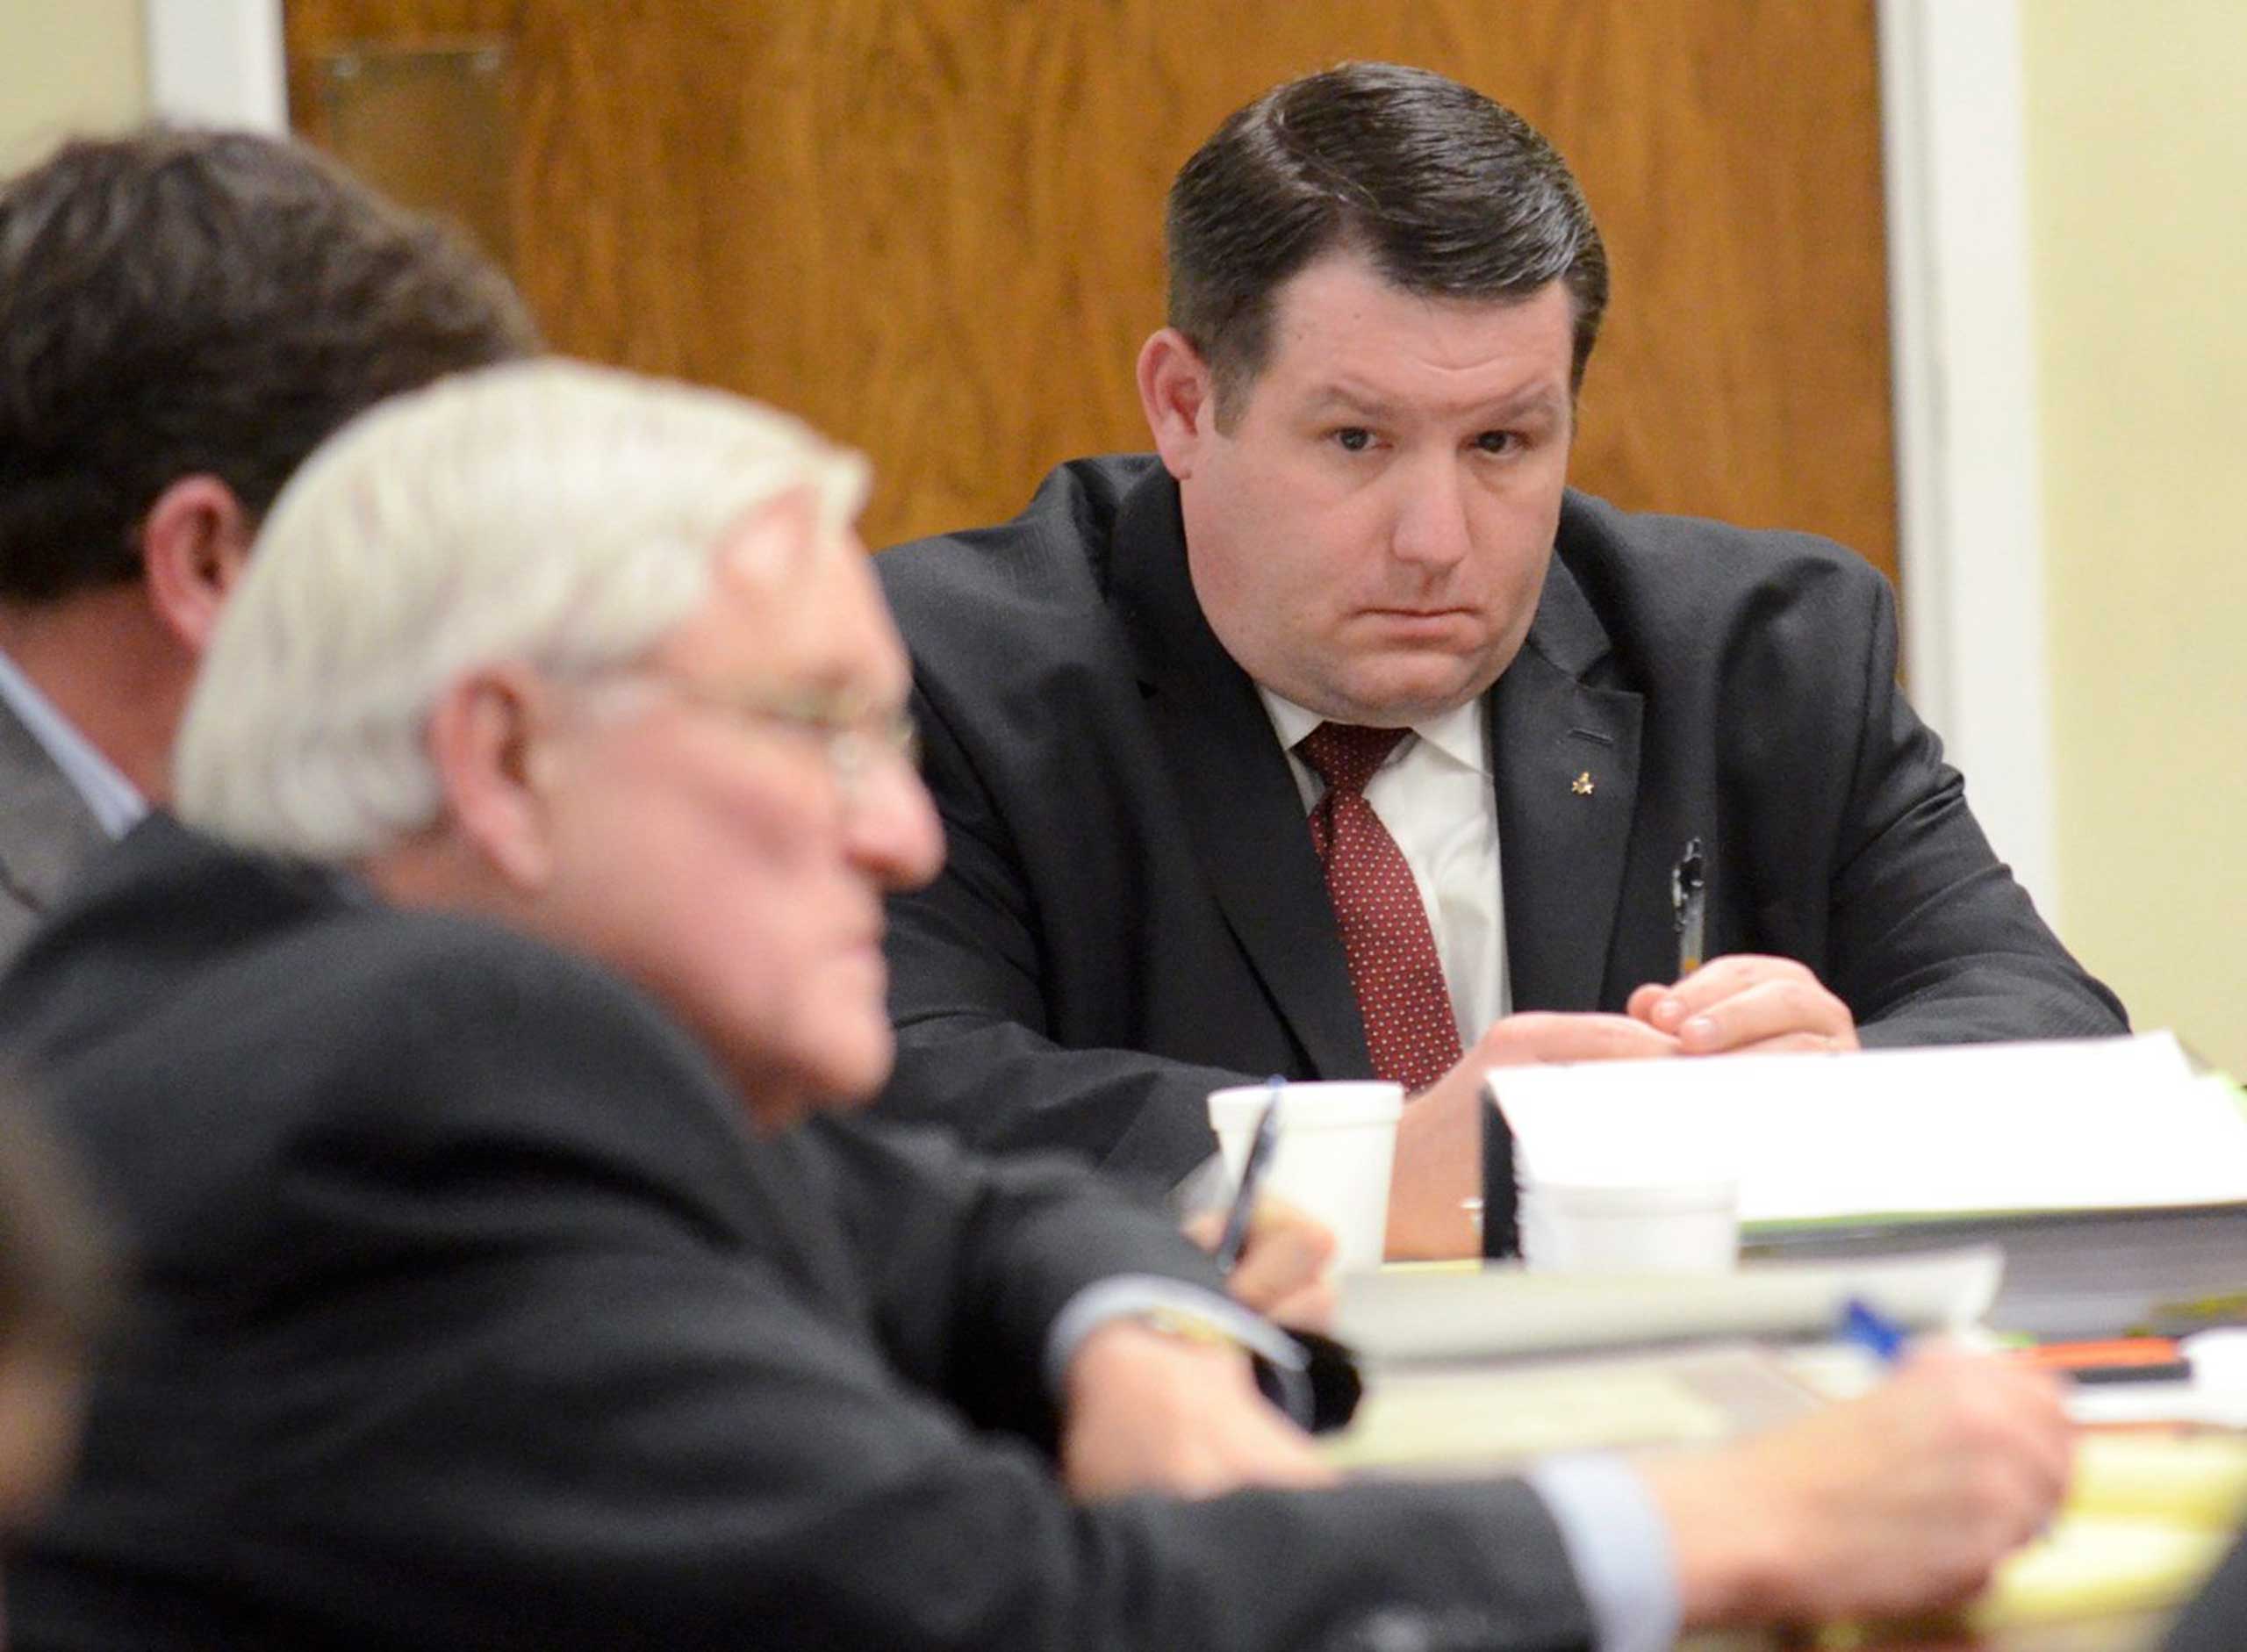 Former Eutawville Police Chief Richard Combs sits with lawyers on the second day of testimony in his trial for the murder of Bernard Bailey in Orangeburg, South Carolina, Jan. 8, 2015. (Reuters)